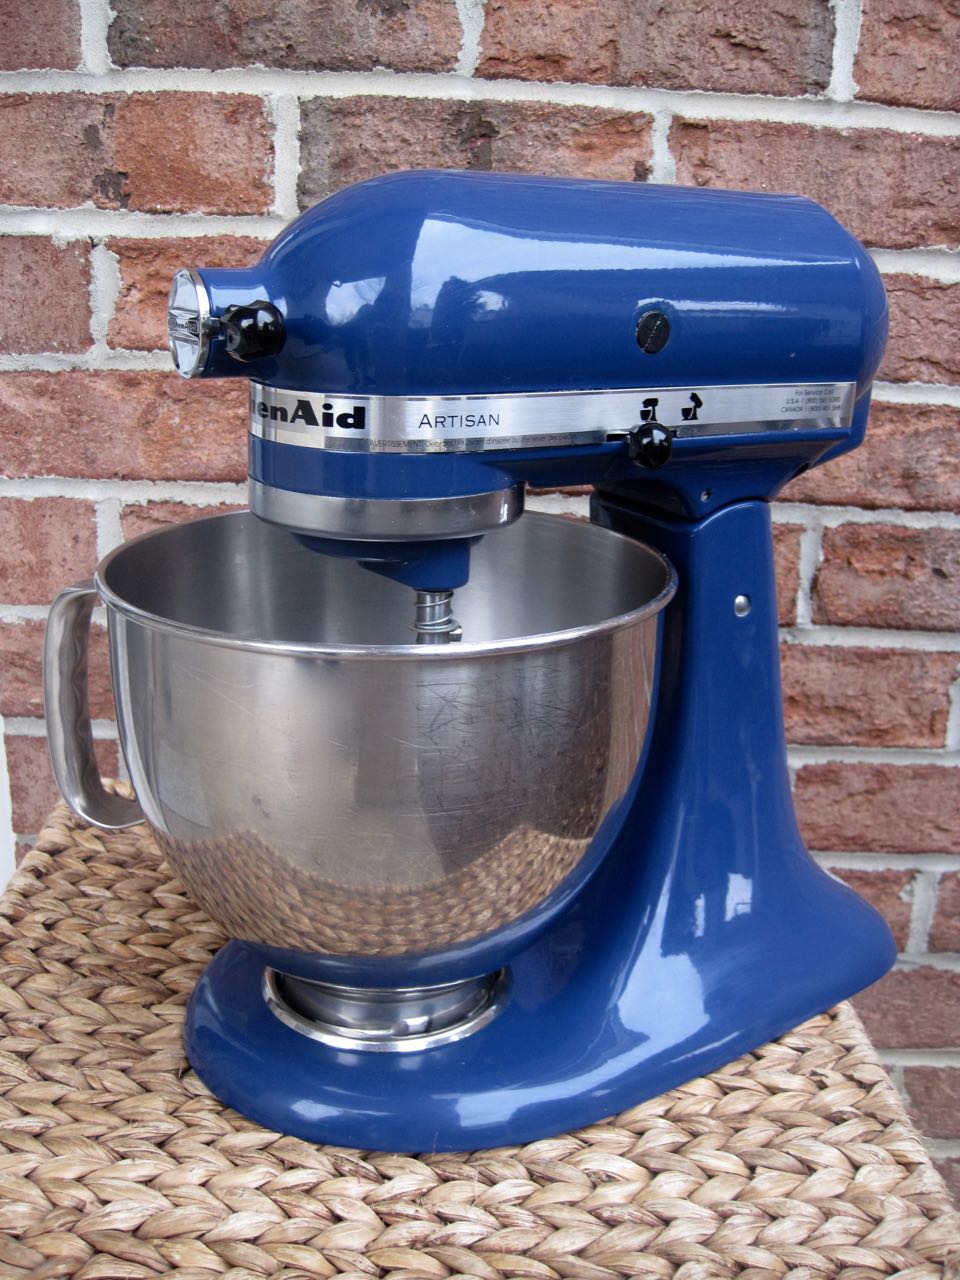 How to Paint Your Kitchen Aid Mixer